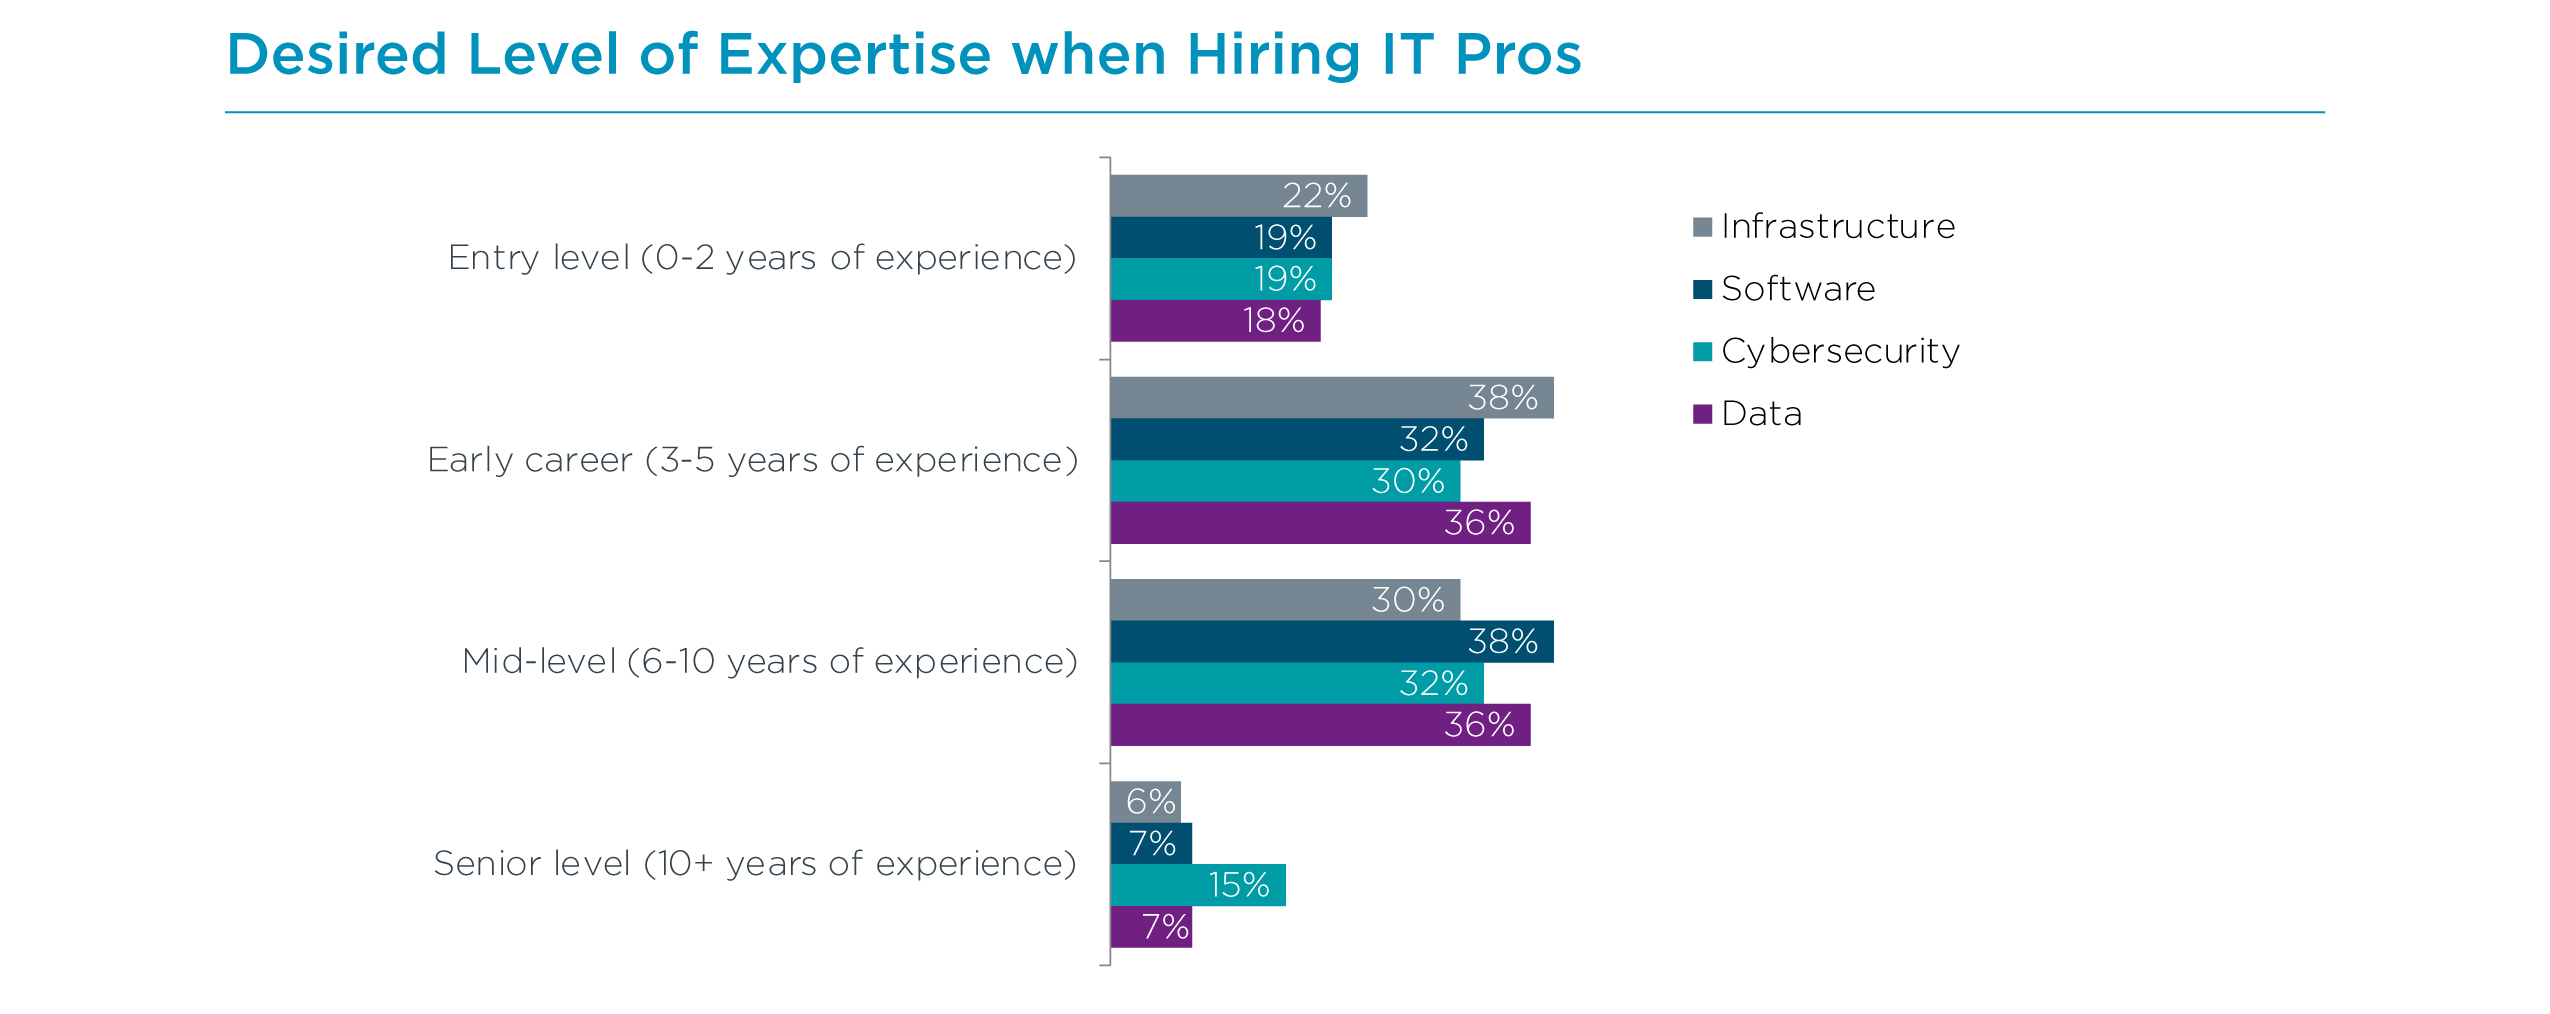 Desired Level of Expertise when Hiring IT Pros